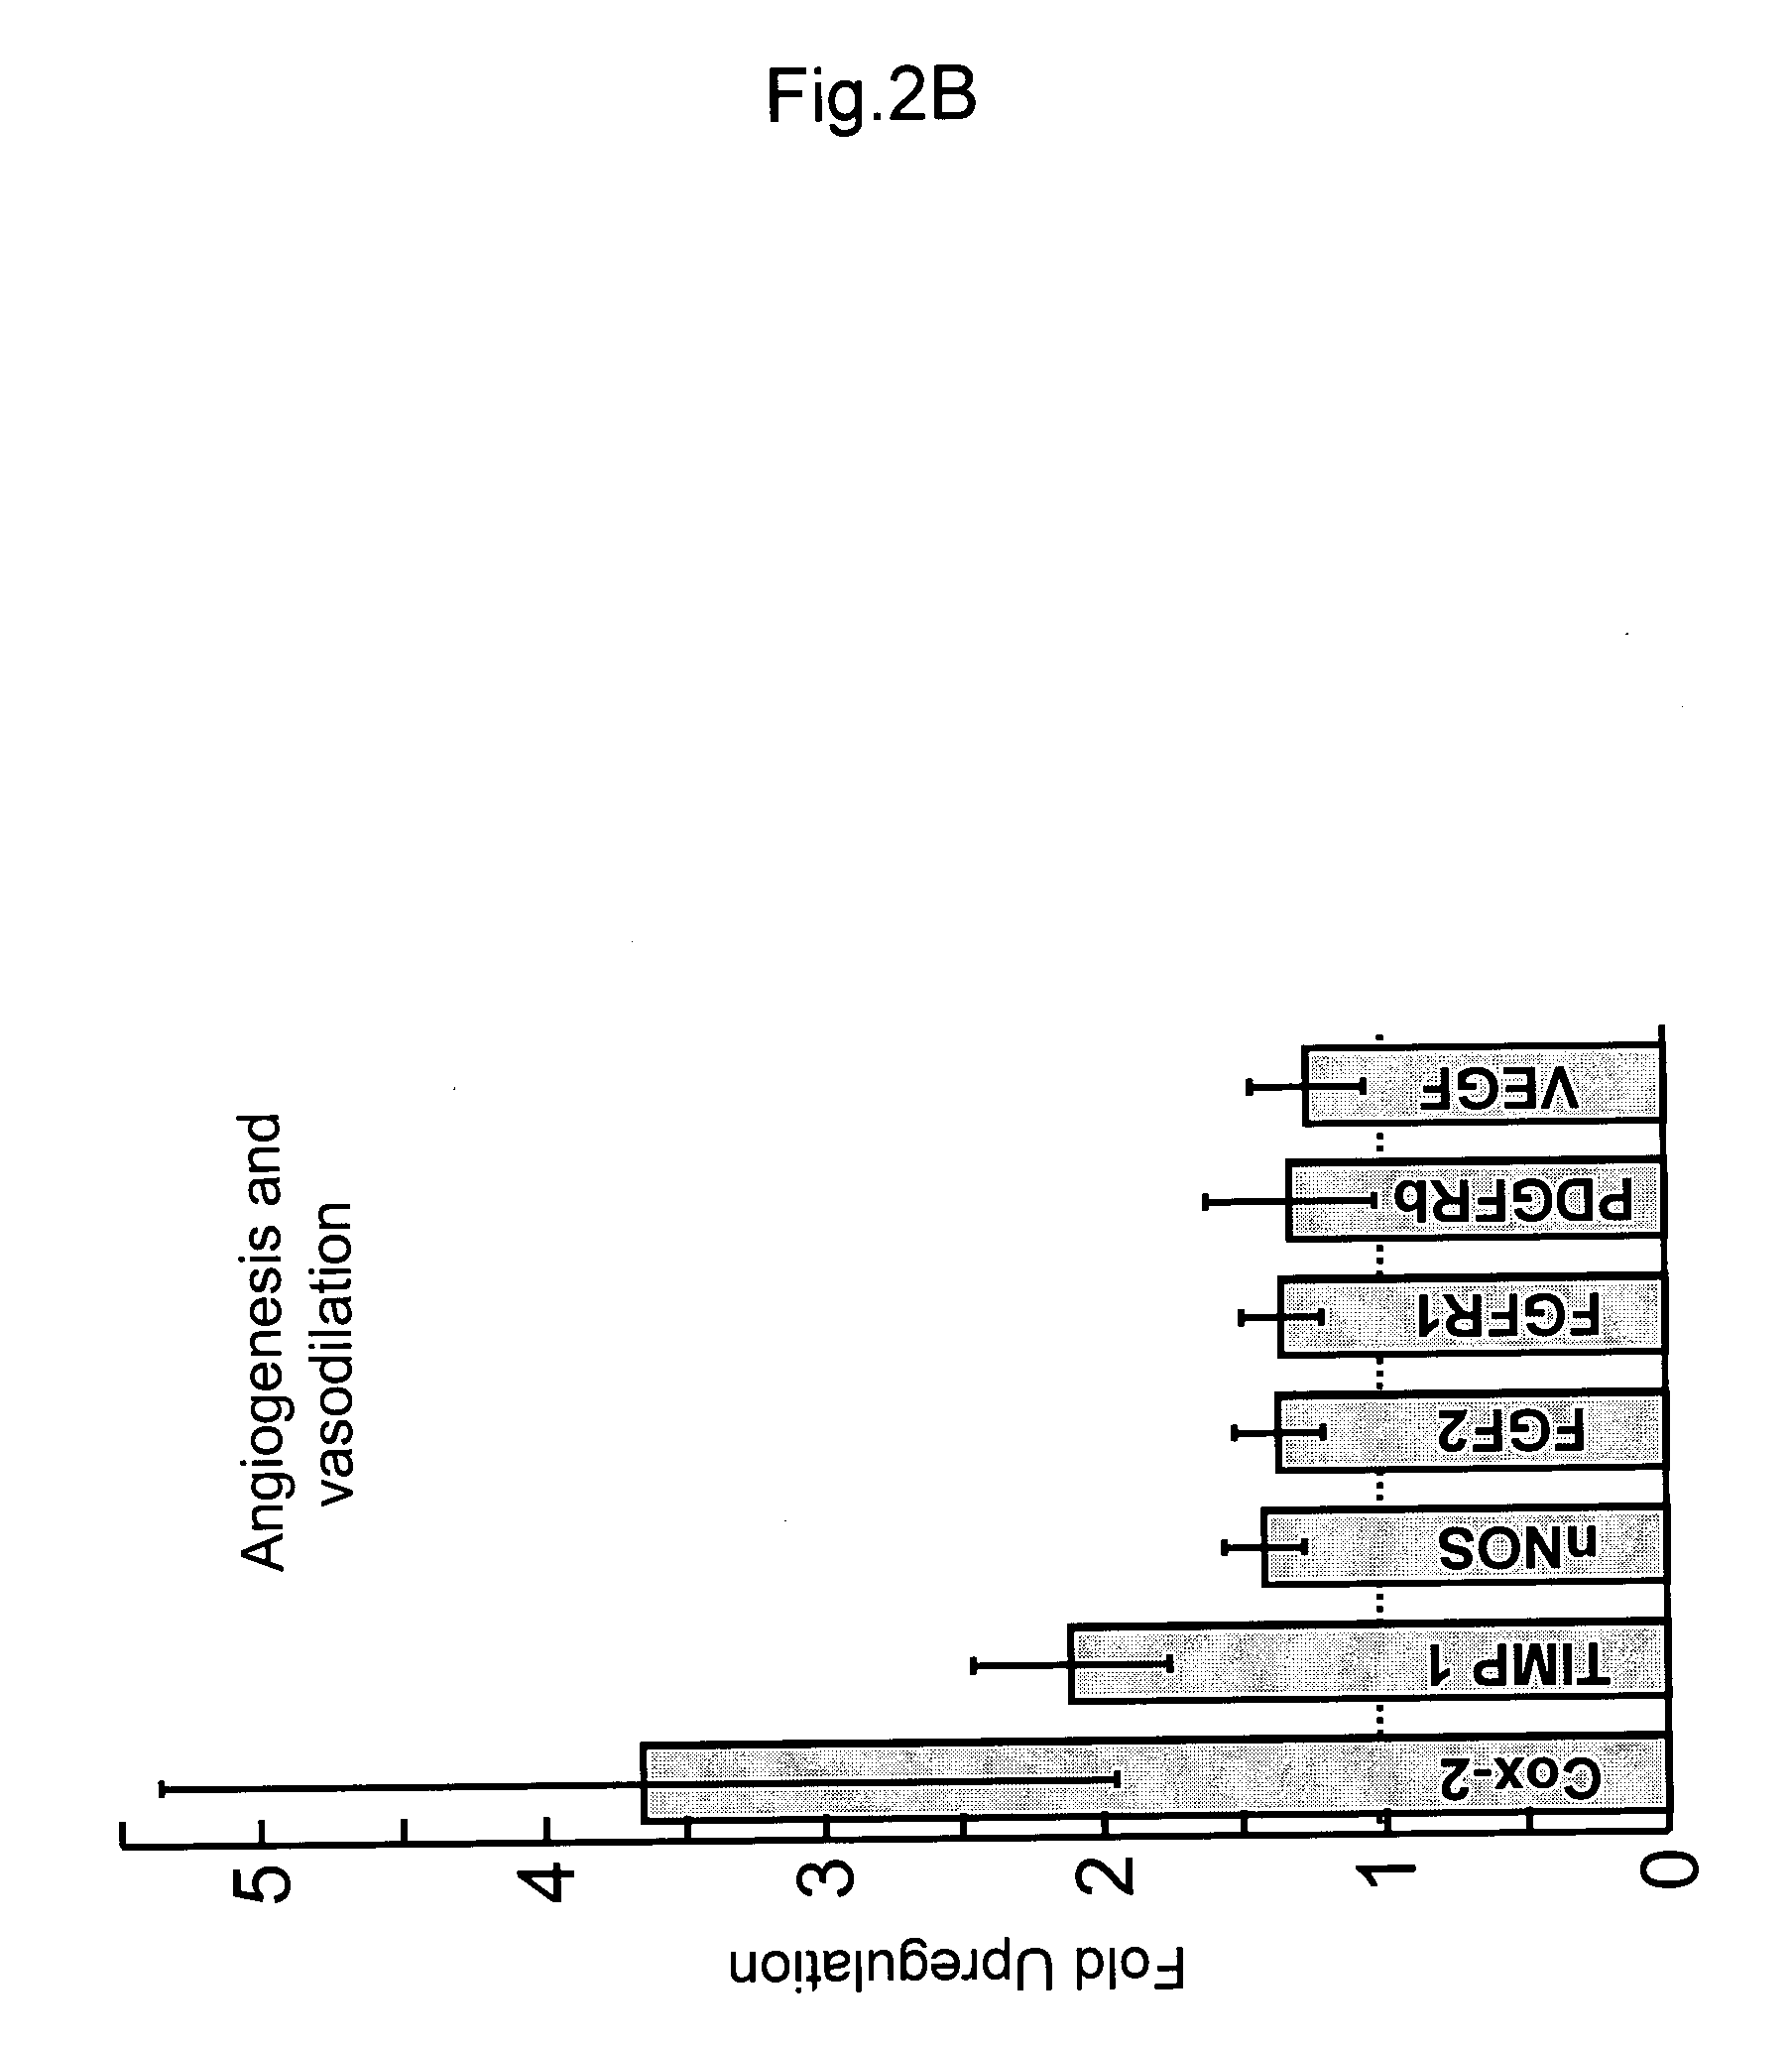 Systems and methods for diagnosing & treating psychological and behavioral conditions